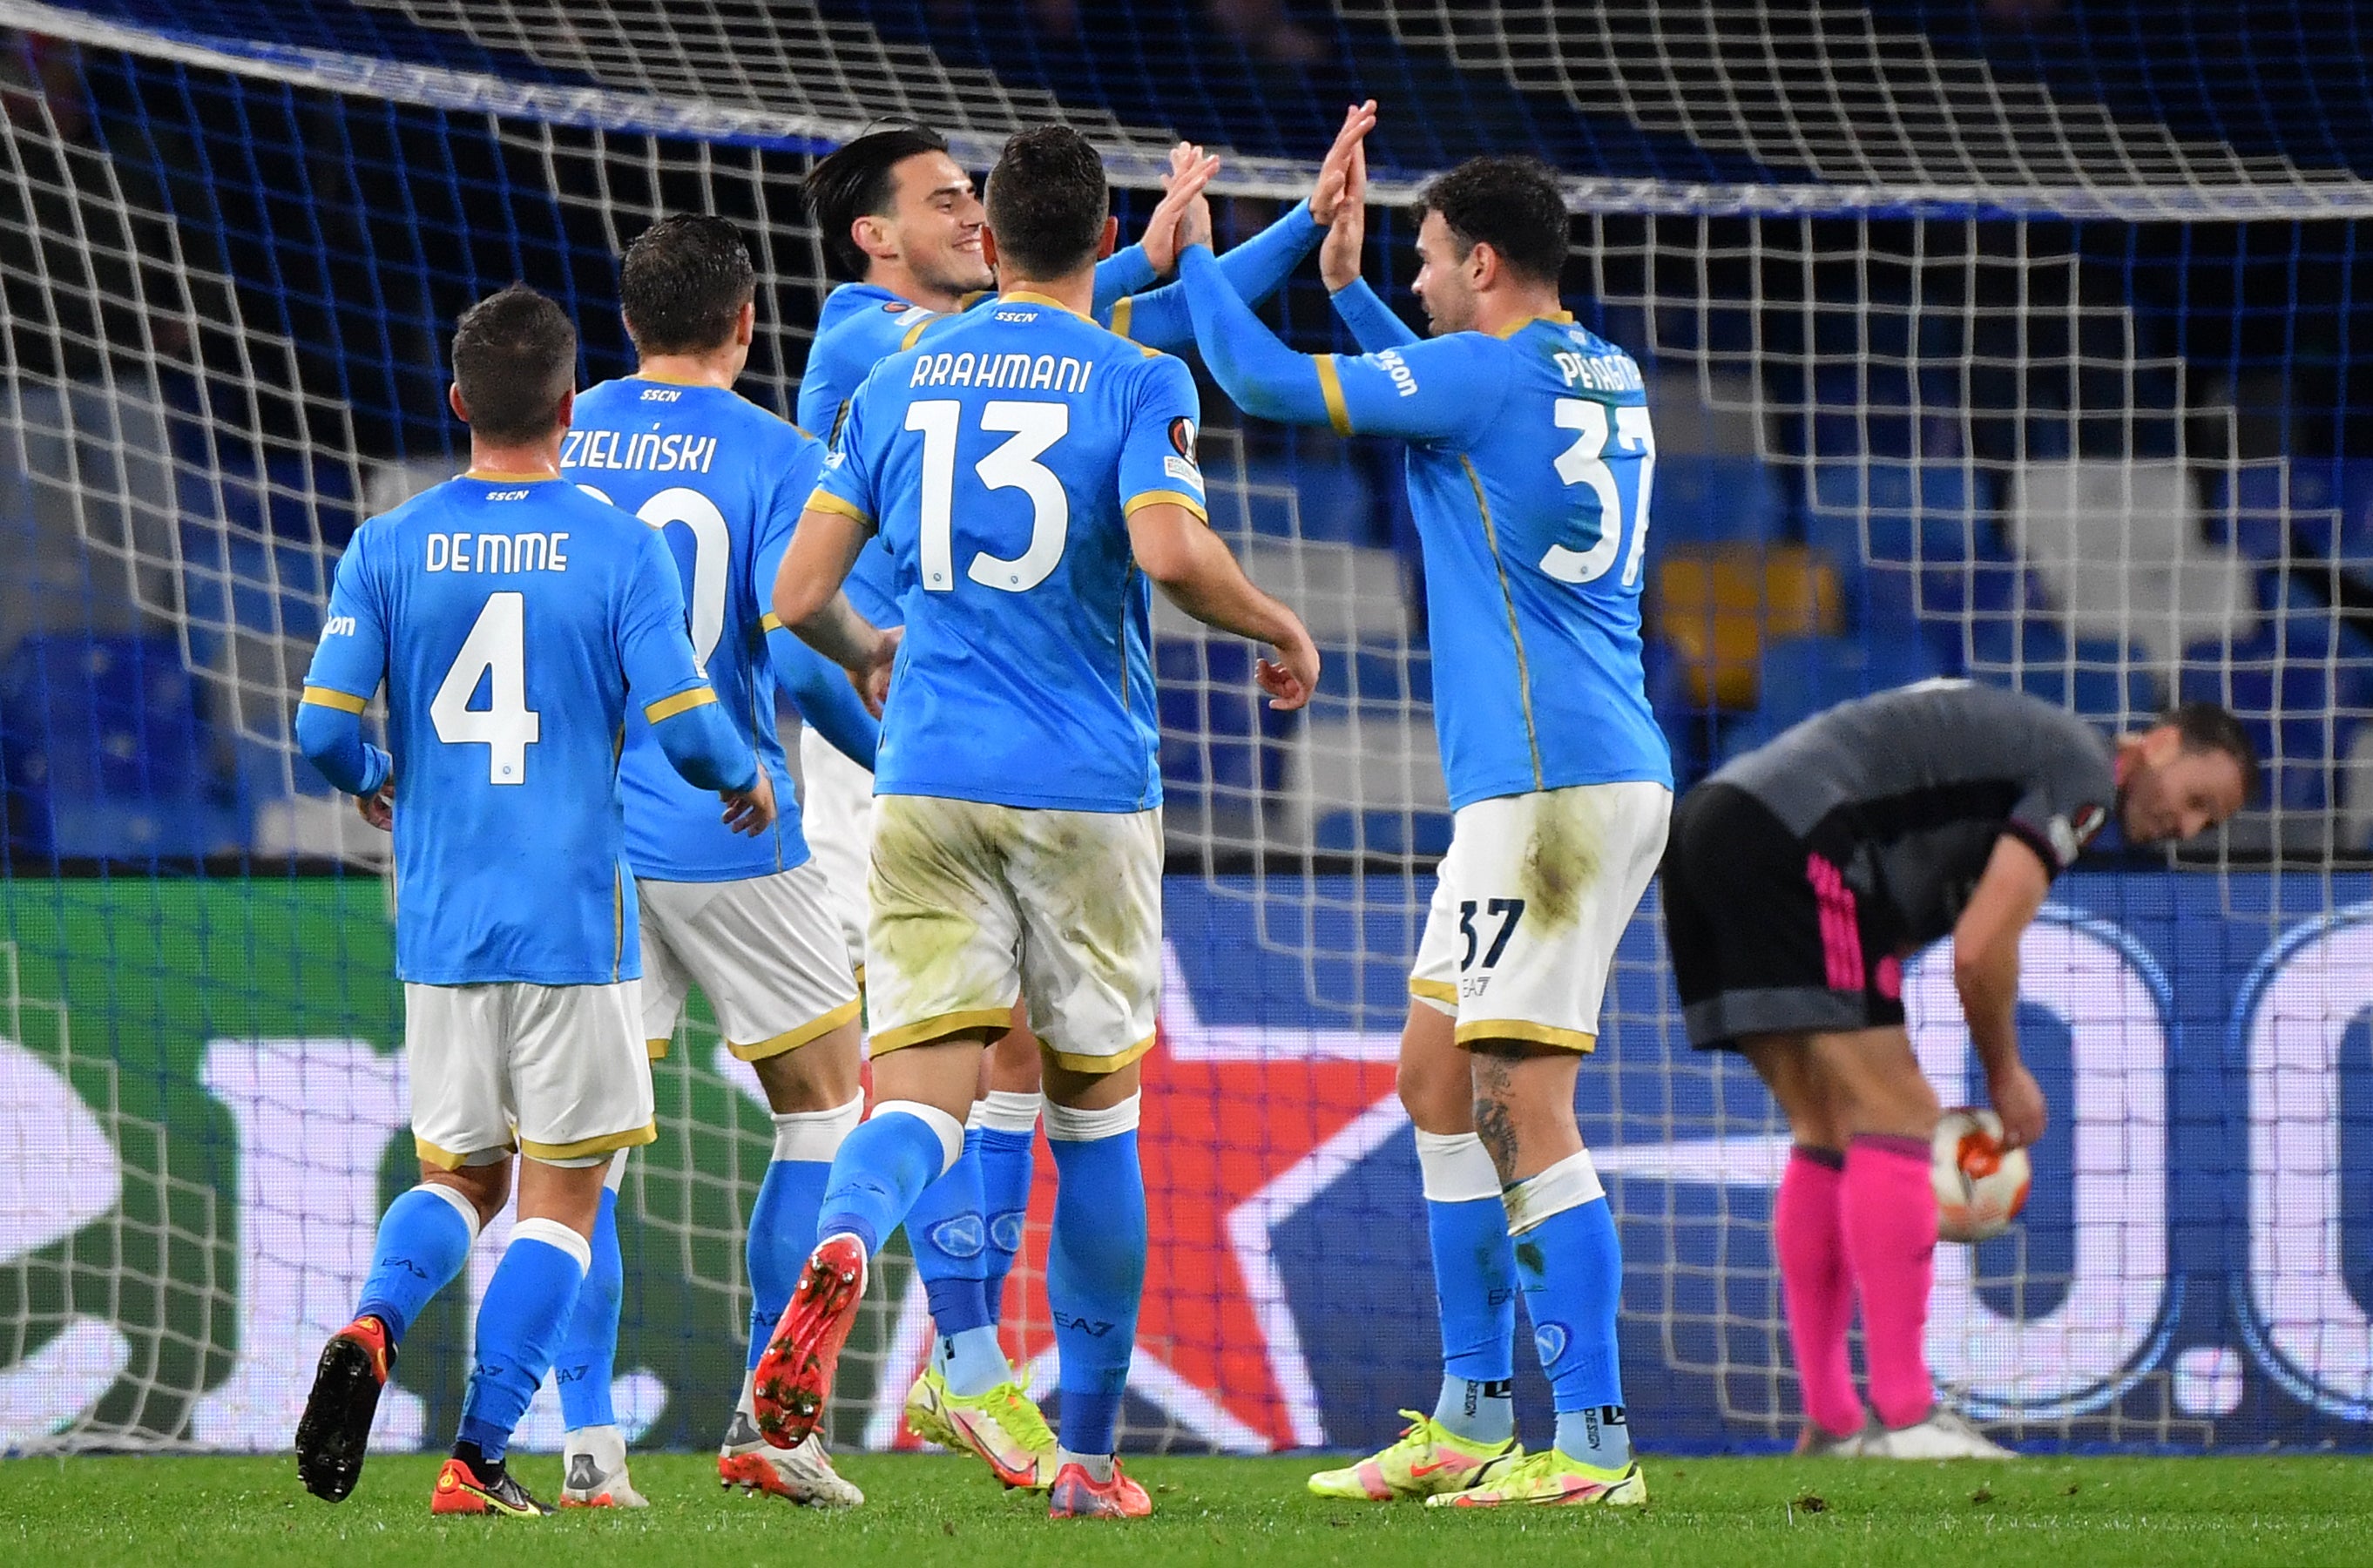 Napoli’s Eljif Elmas (centre) celebrates what turned out to be the winning goal